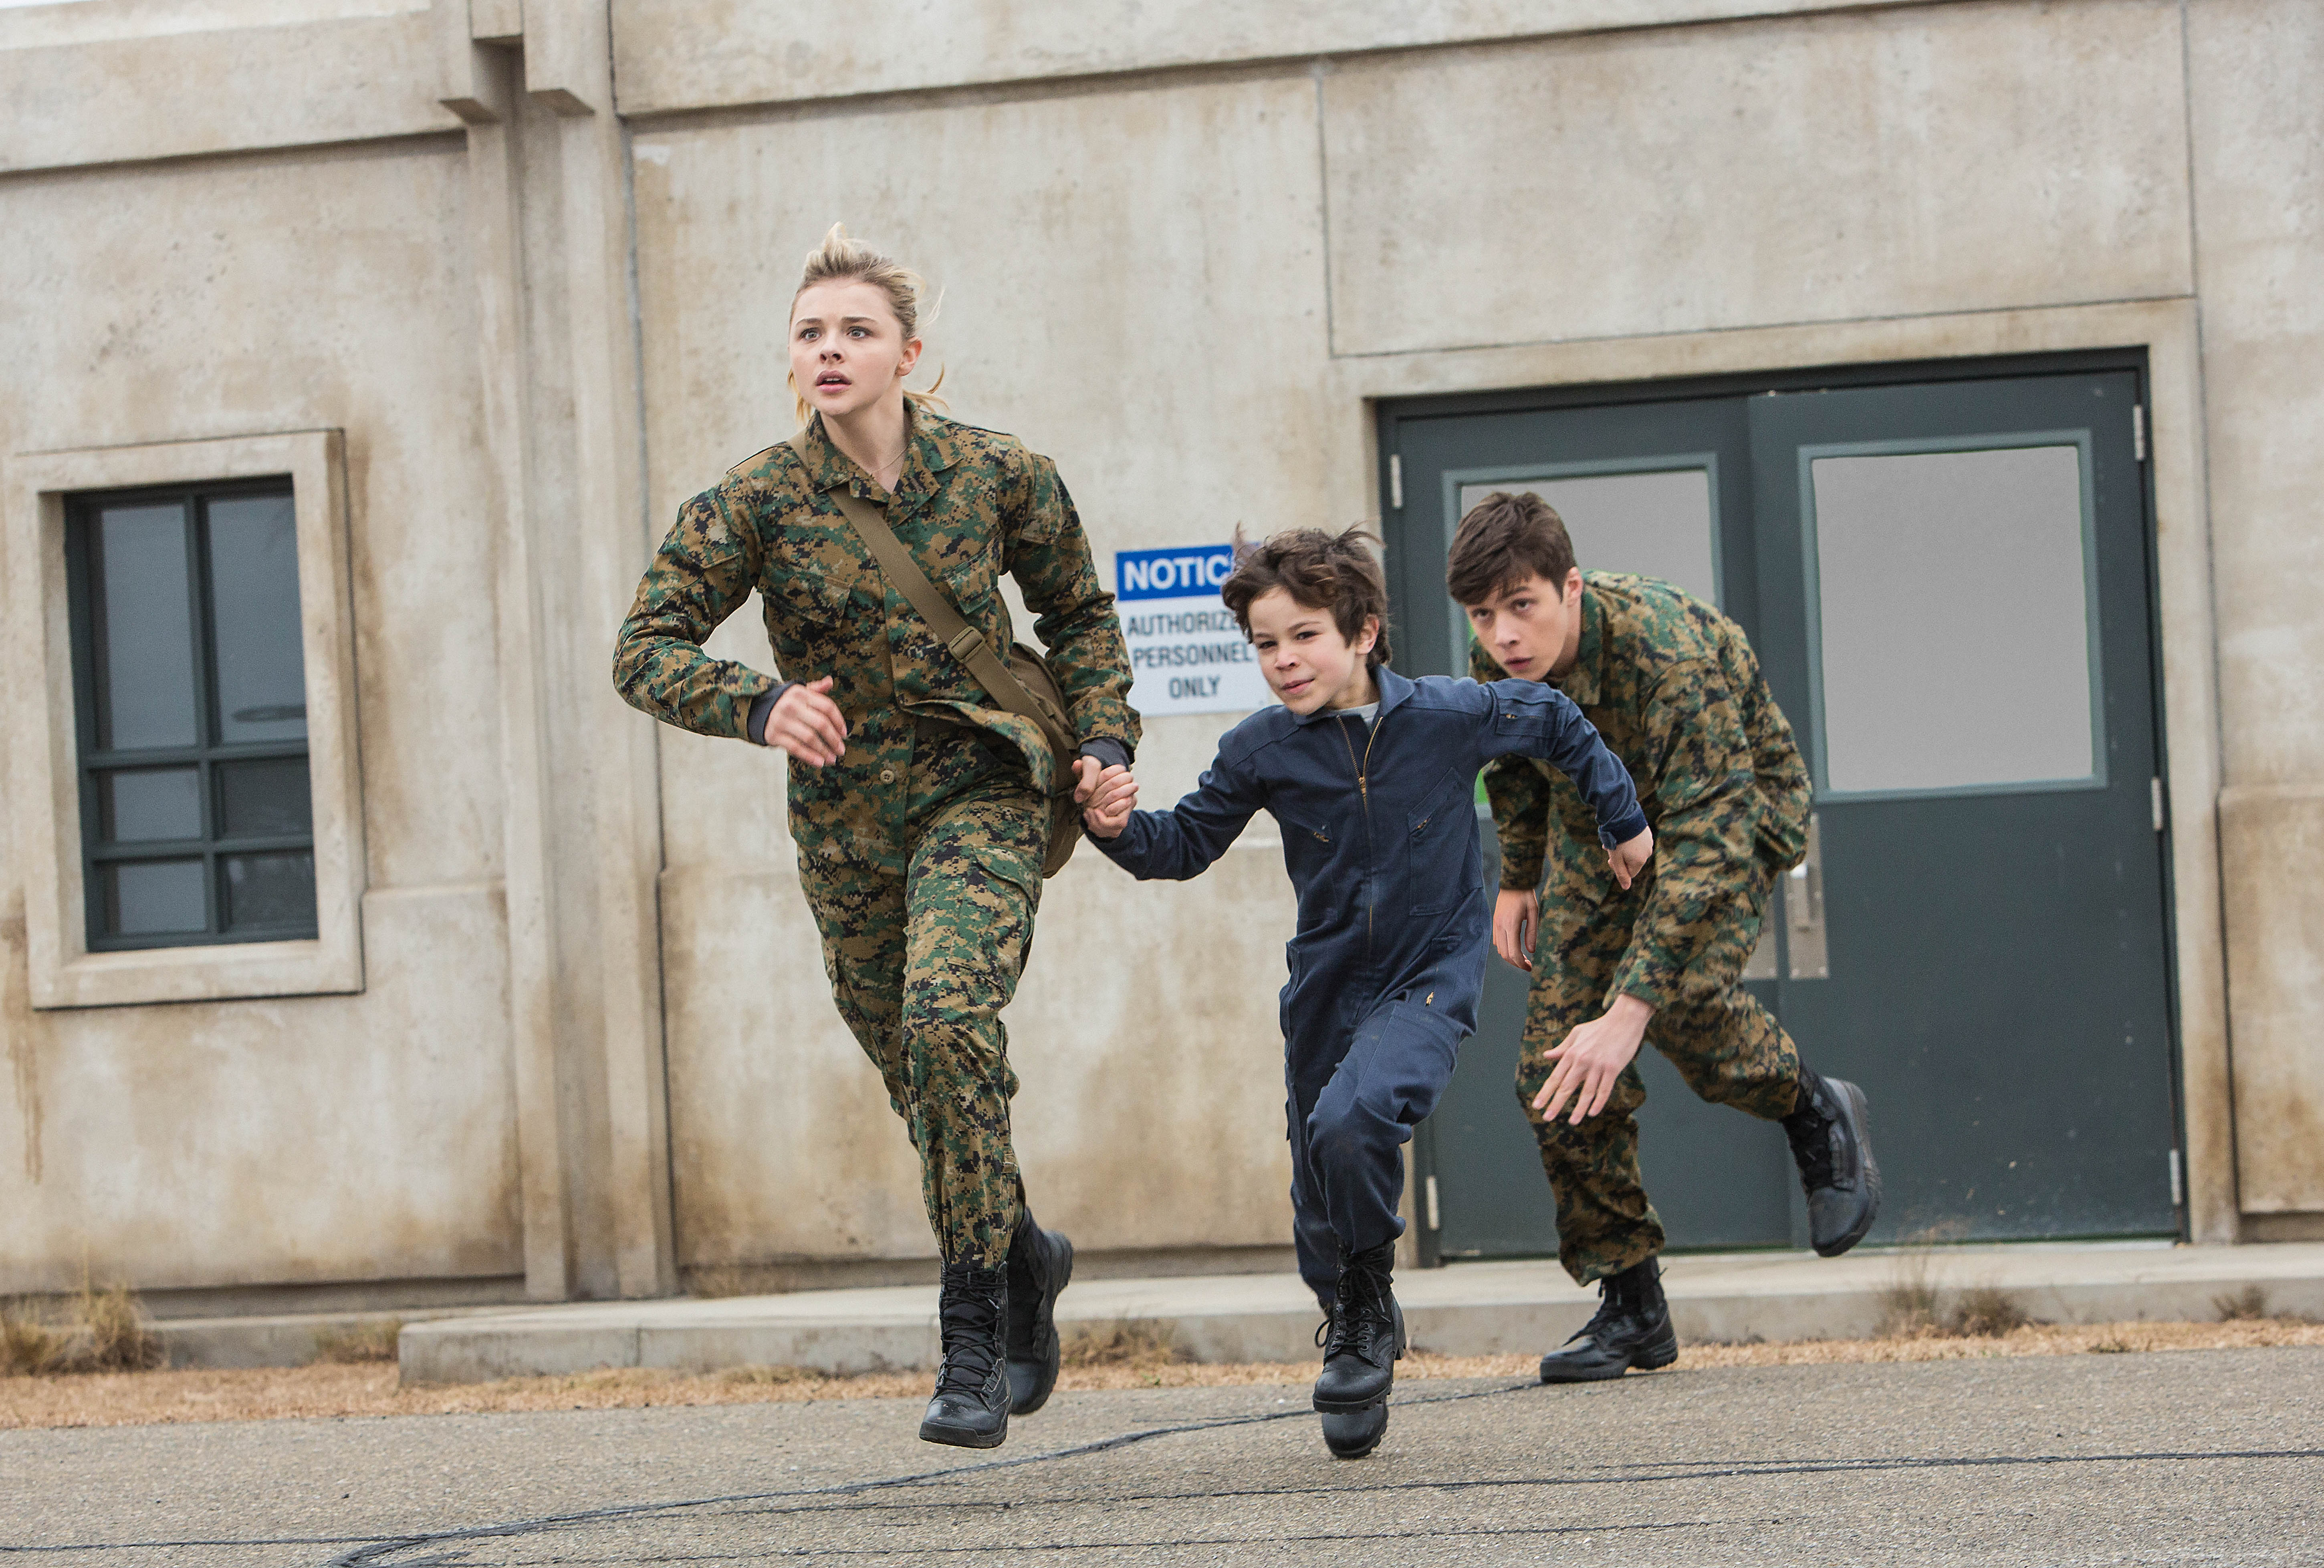 Movie The 5th Wave 4k Ultra HD Wallpaper